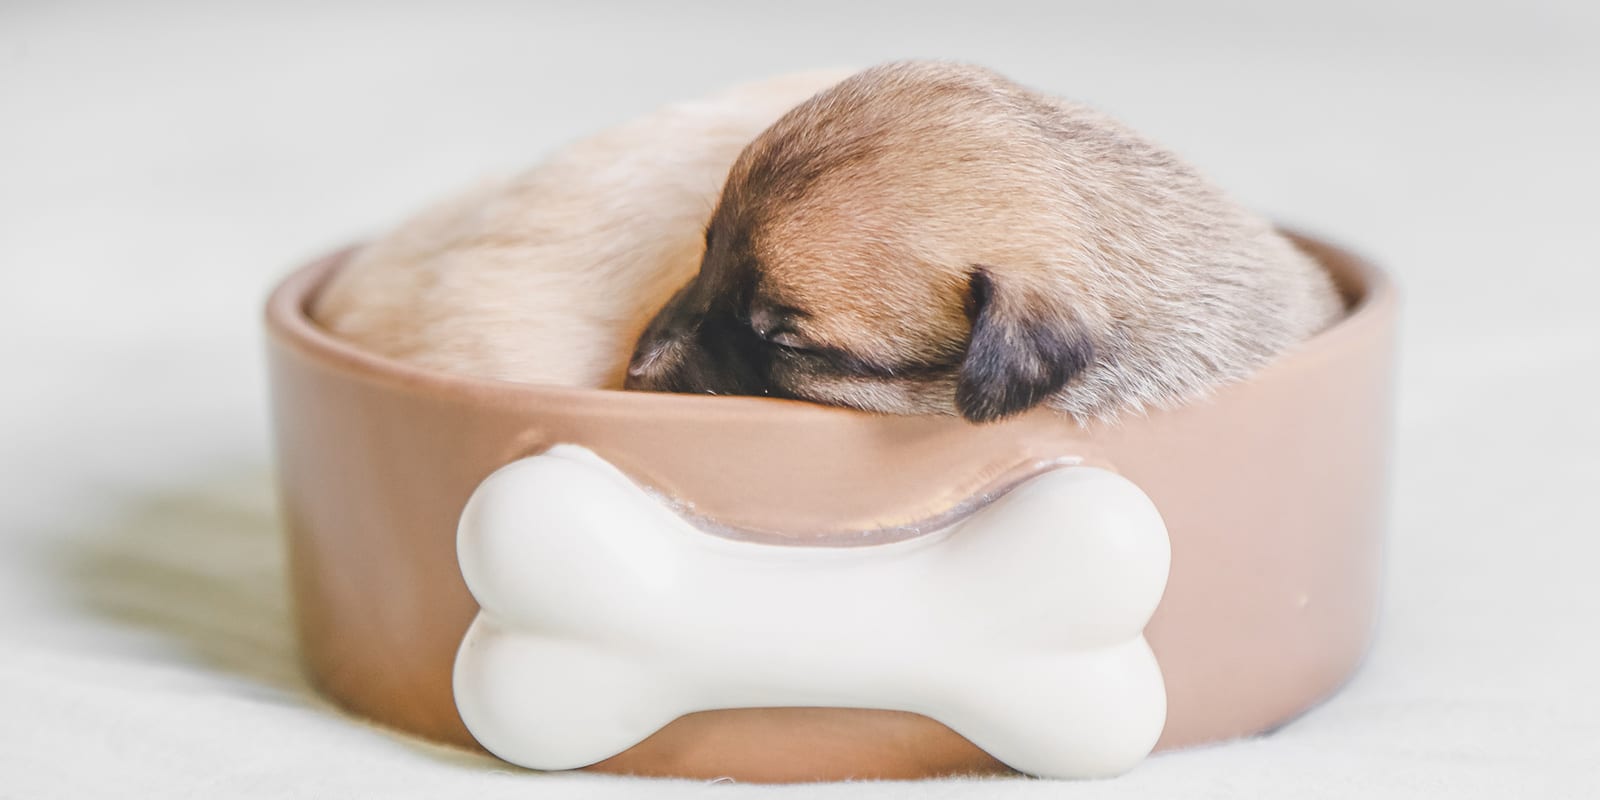 pup in a bowl